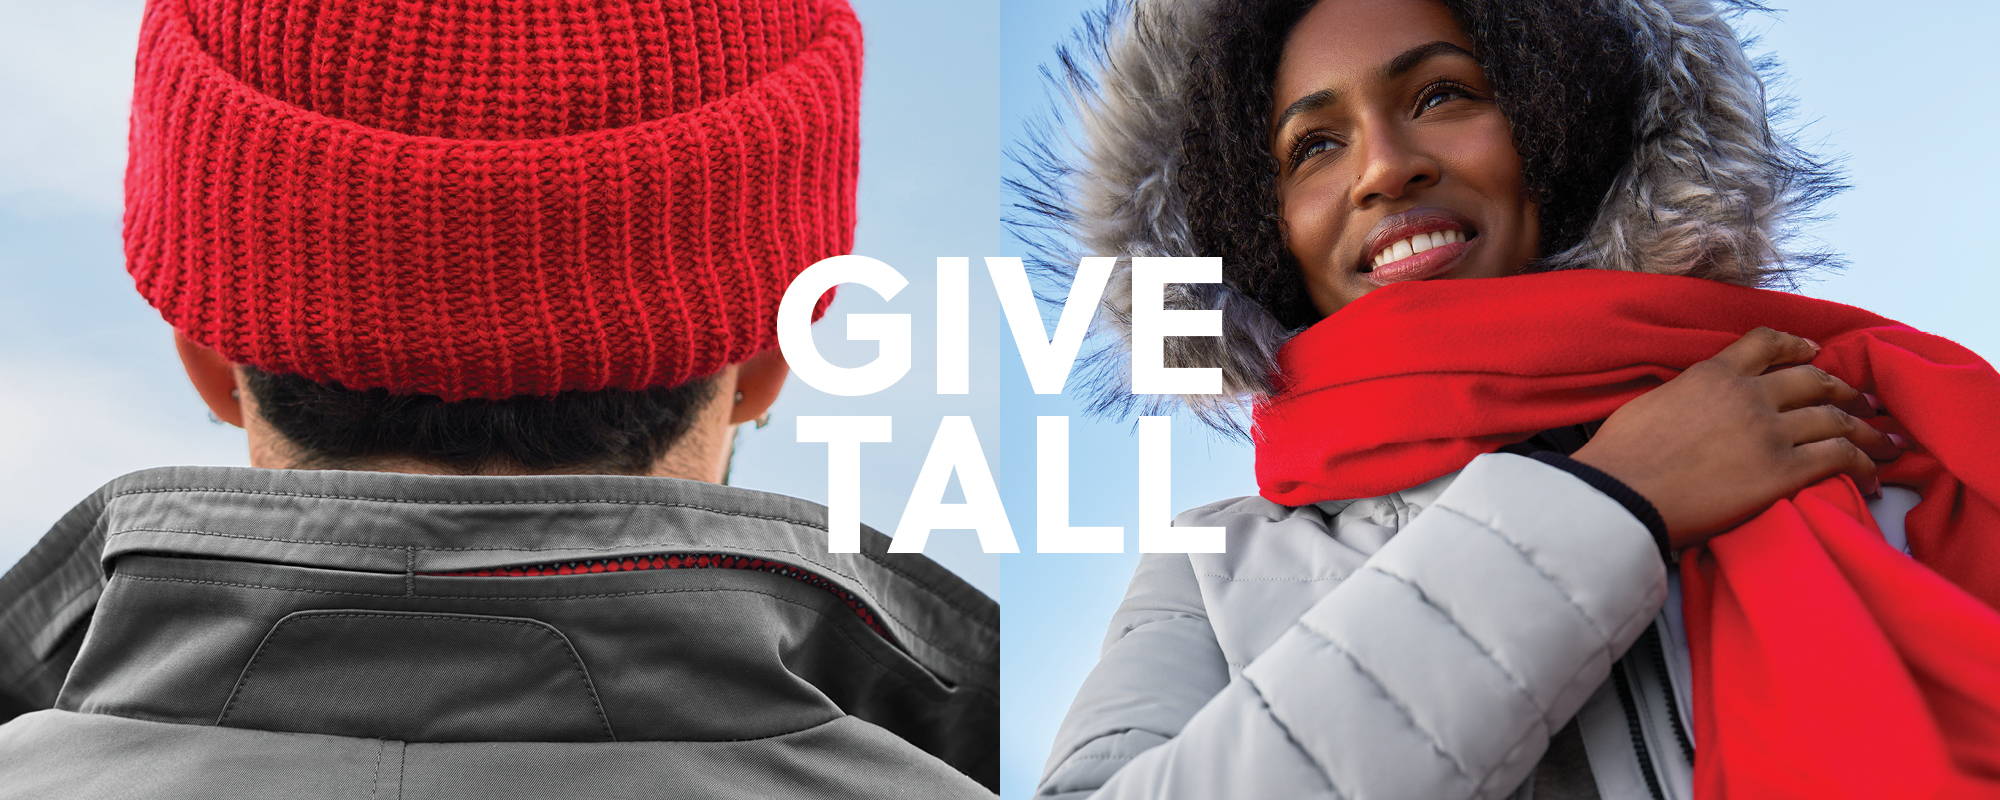 Give Tall. Shop holiday gifts by American Tall